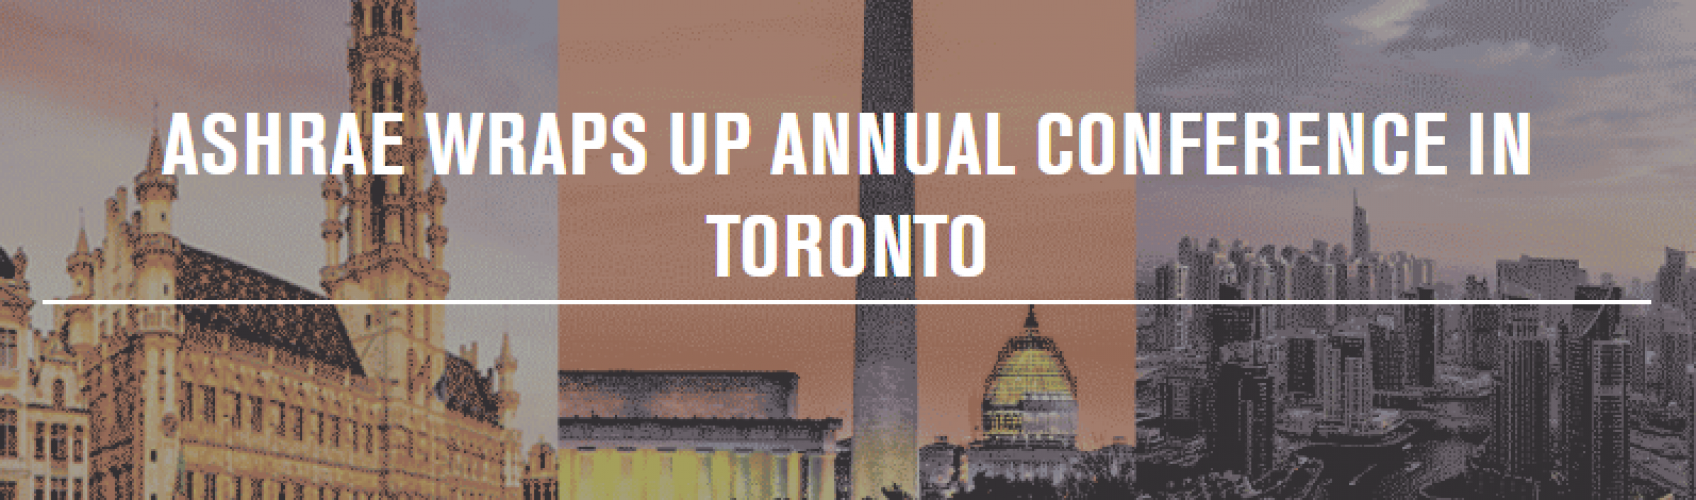 ashrae-wraps-up-annual-conference-in-toronto